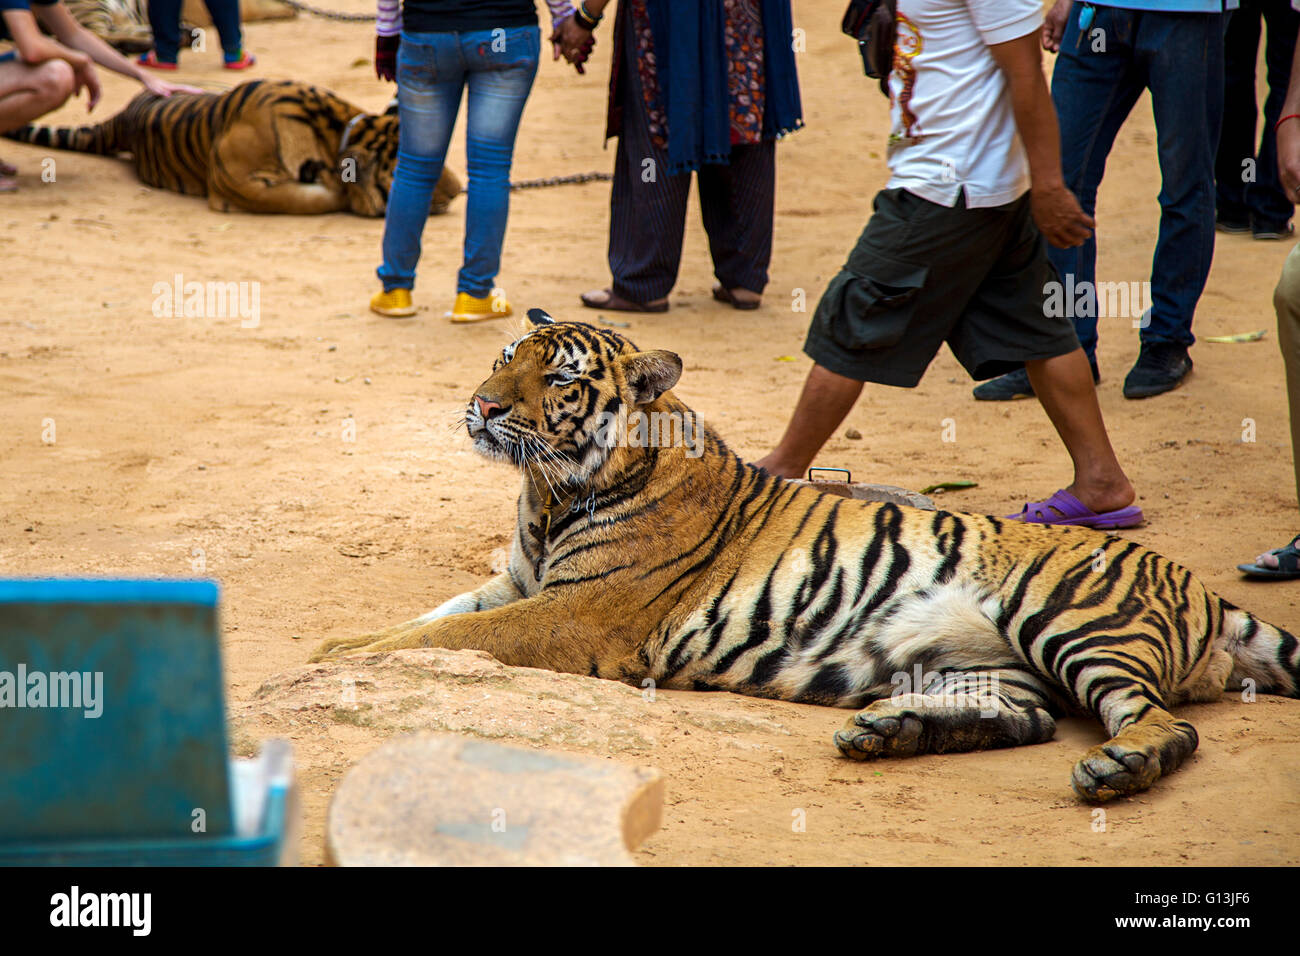 Tiger laying in the Tiger temple in Thailand Stock Photo